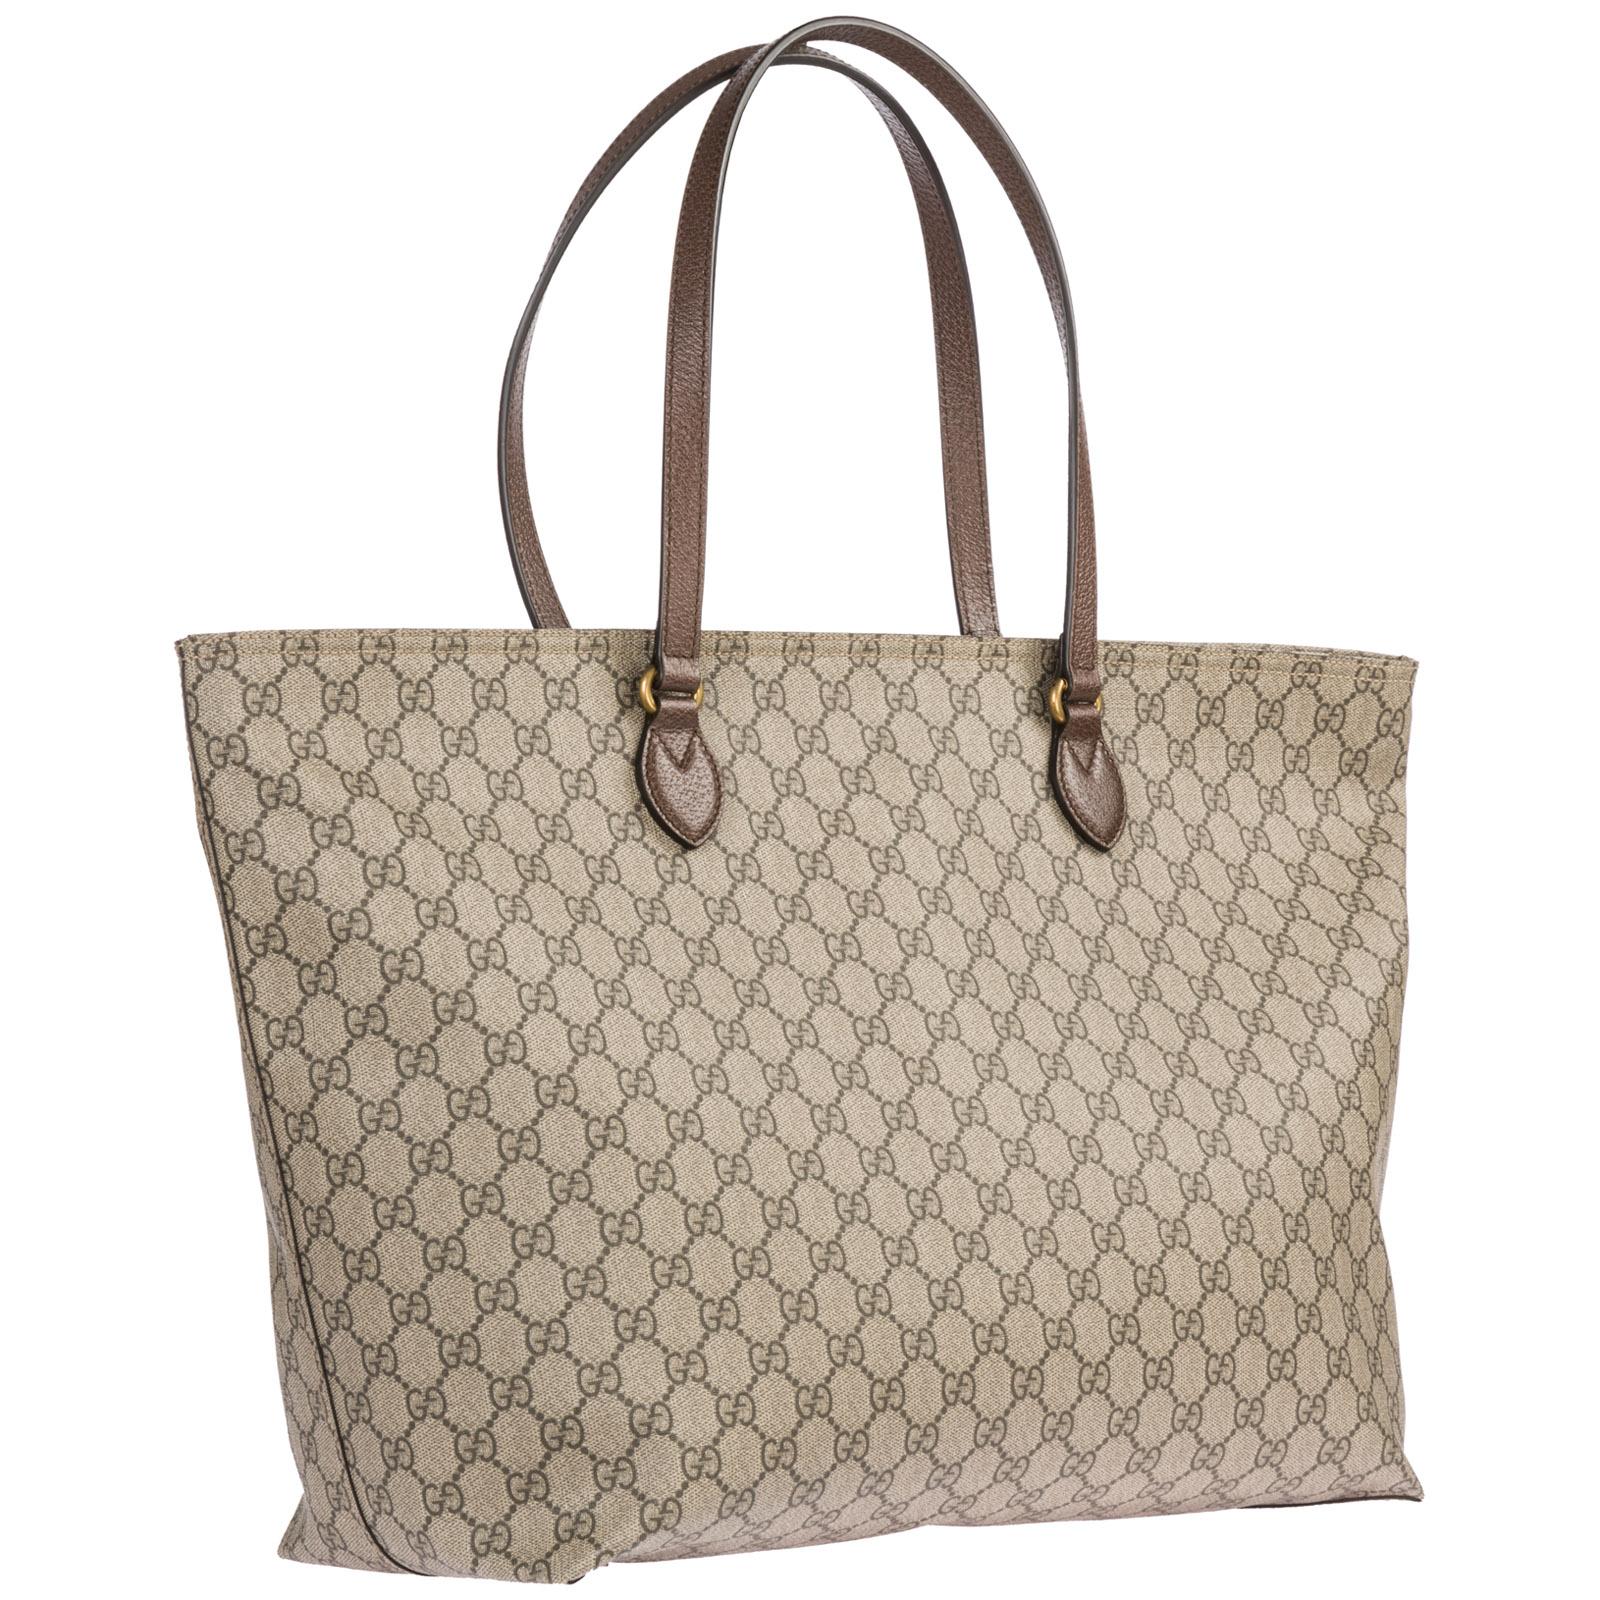 Gucci Ophidia GG Large Tote in Natural - Lyst